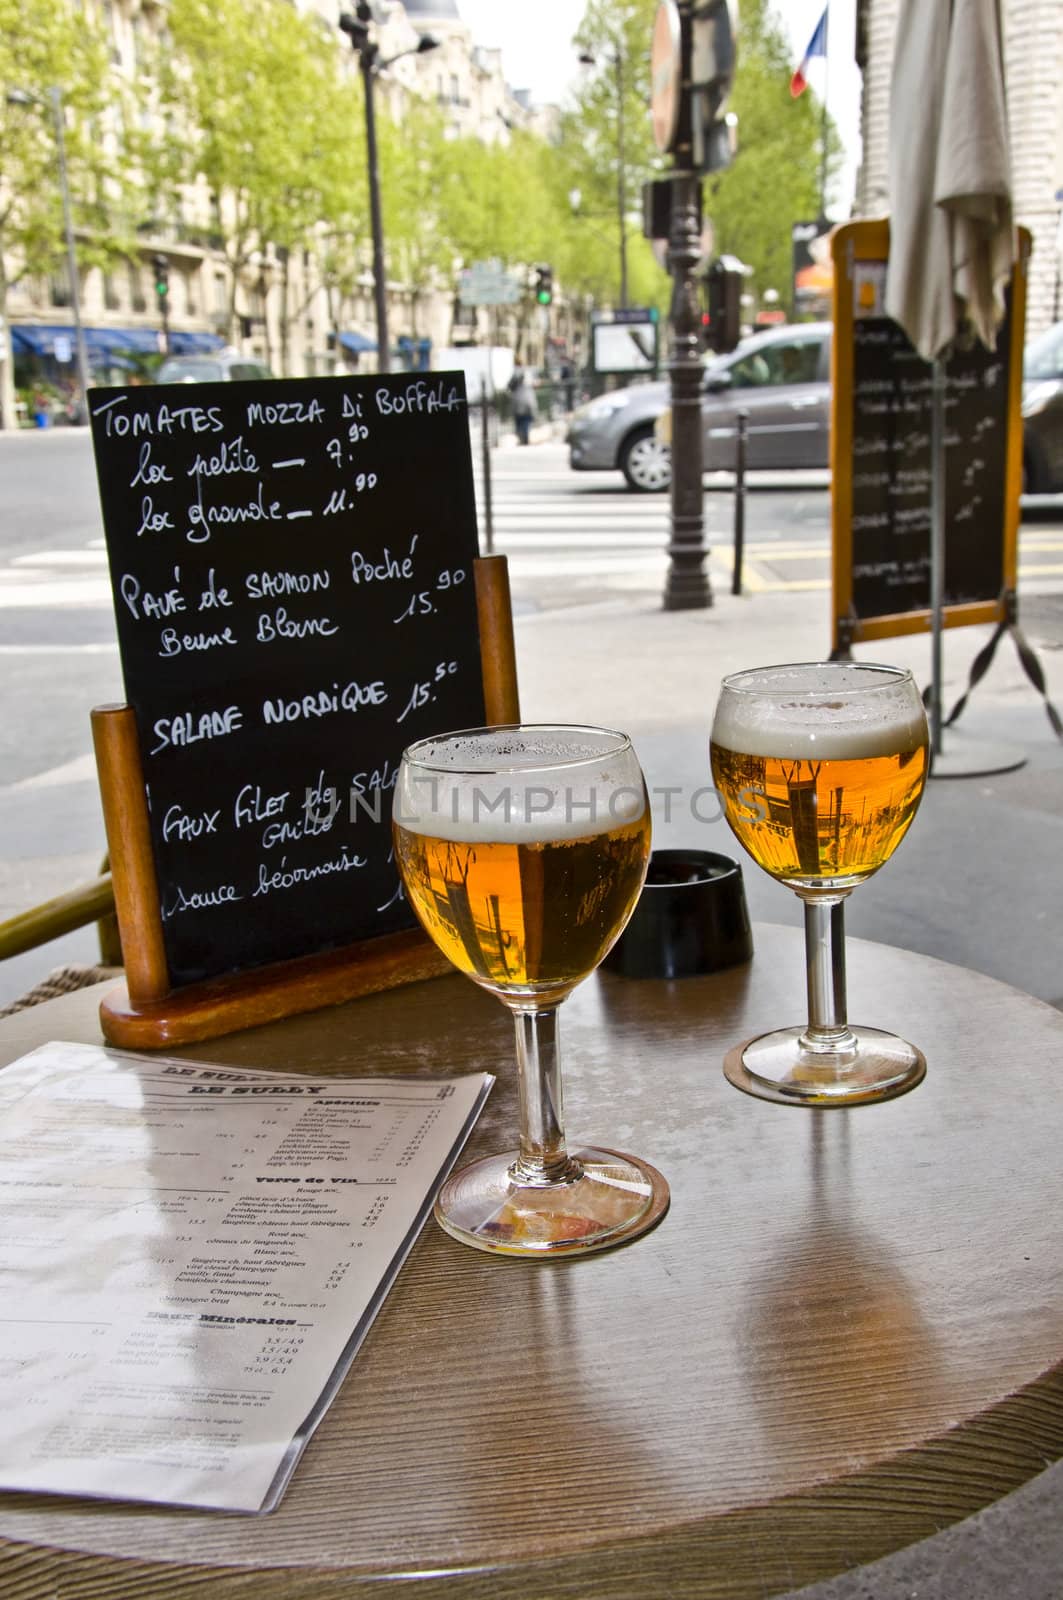 Two glasses of beer on the table of street cafes. Restaurant menu. Urban scene.